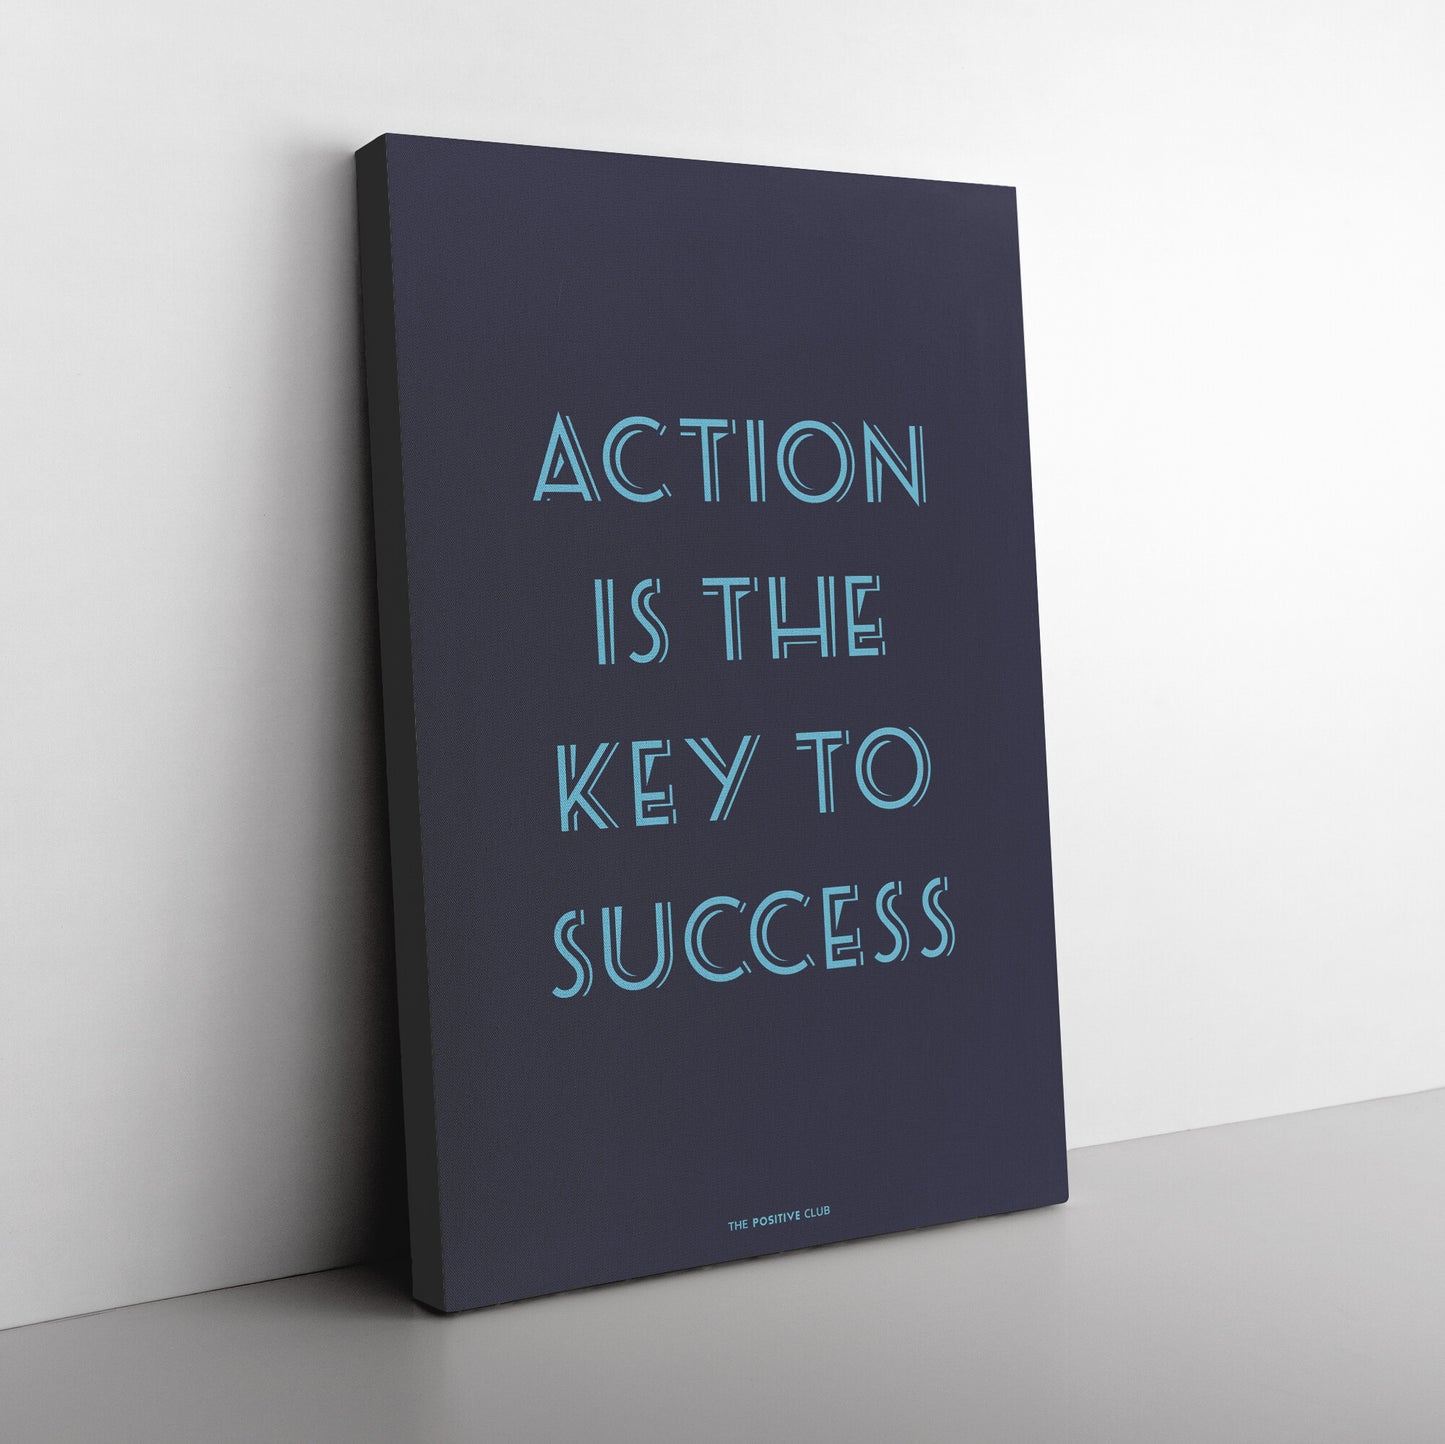 ACTION IS THE KEY TO SUCCESS